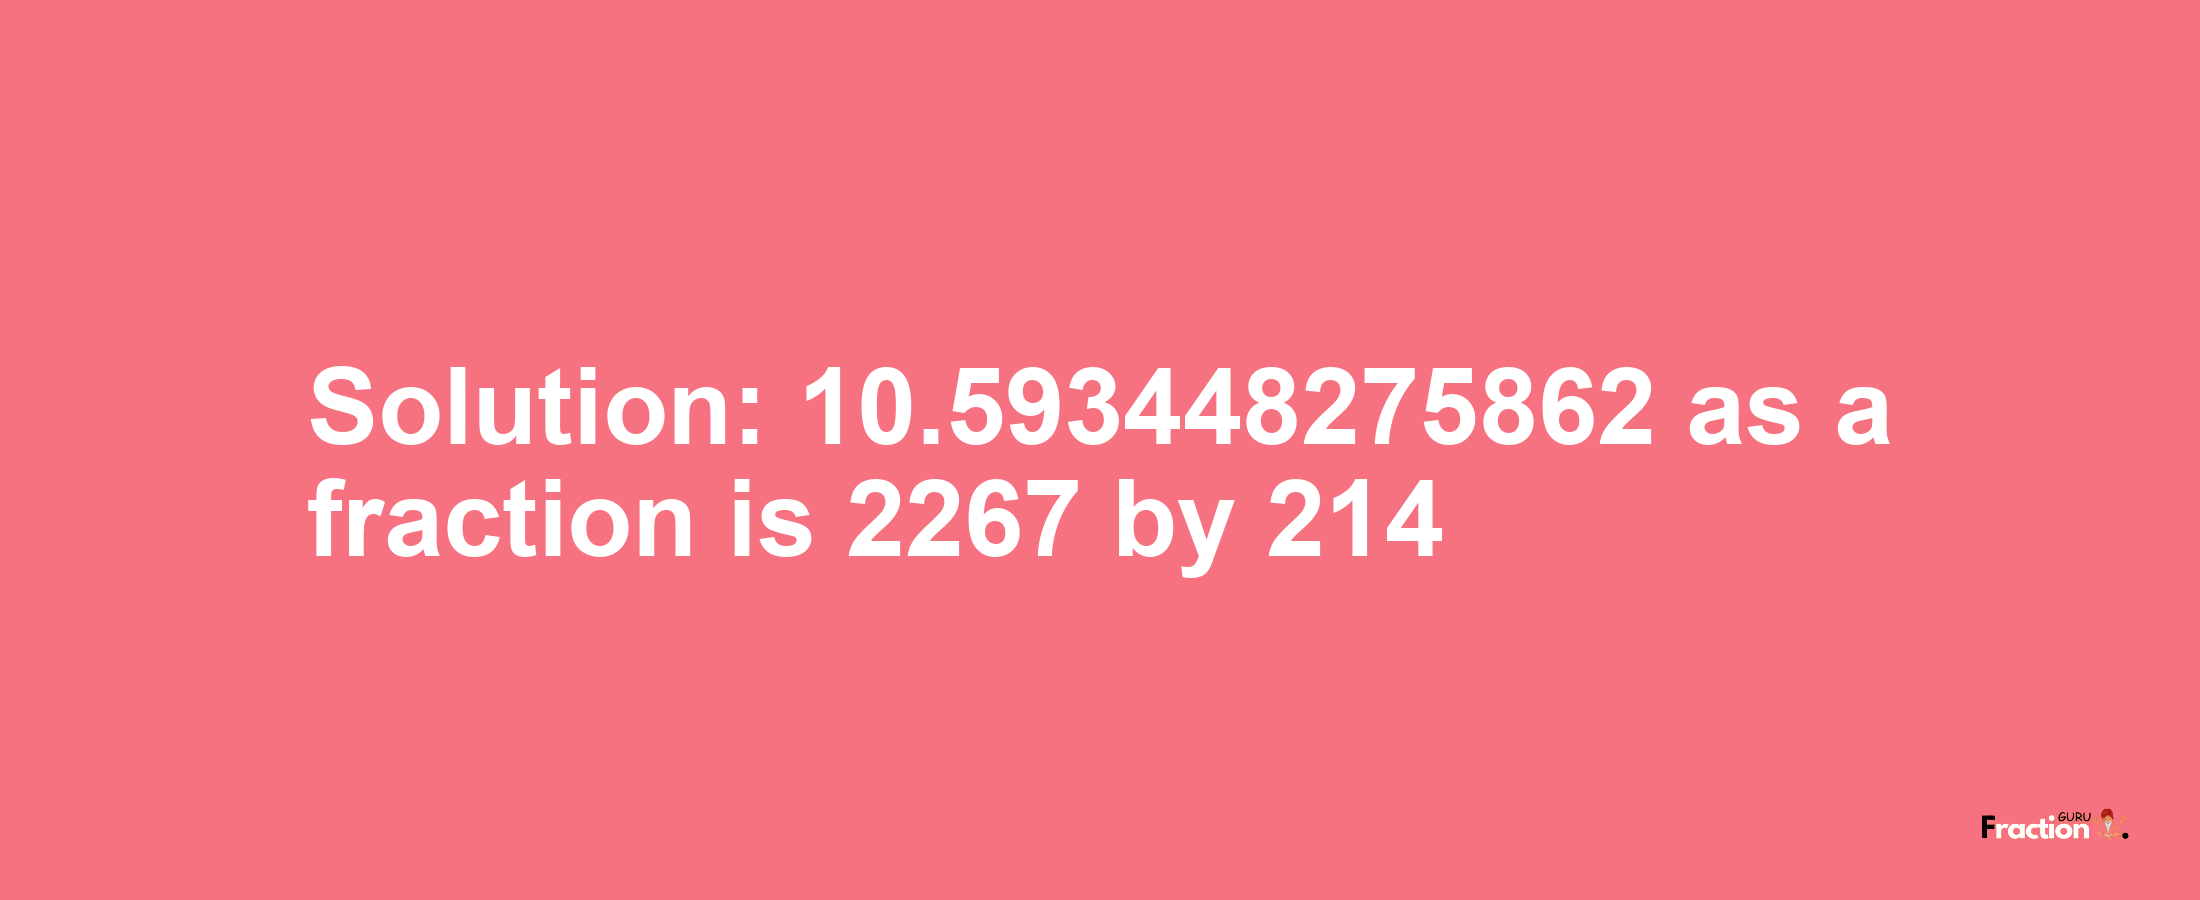 Solution:10.593448275862 as a fraction is 2267/214